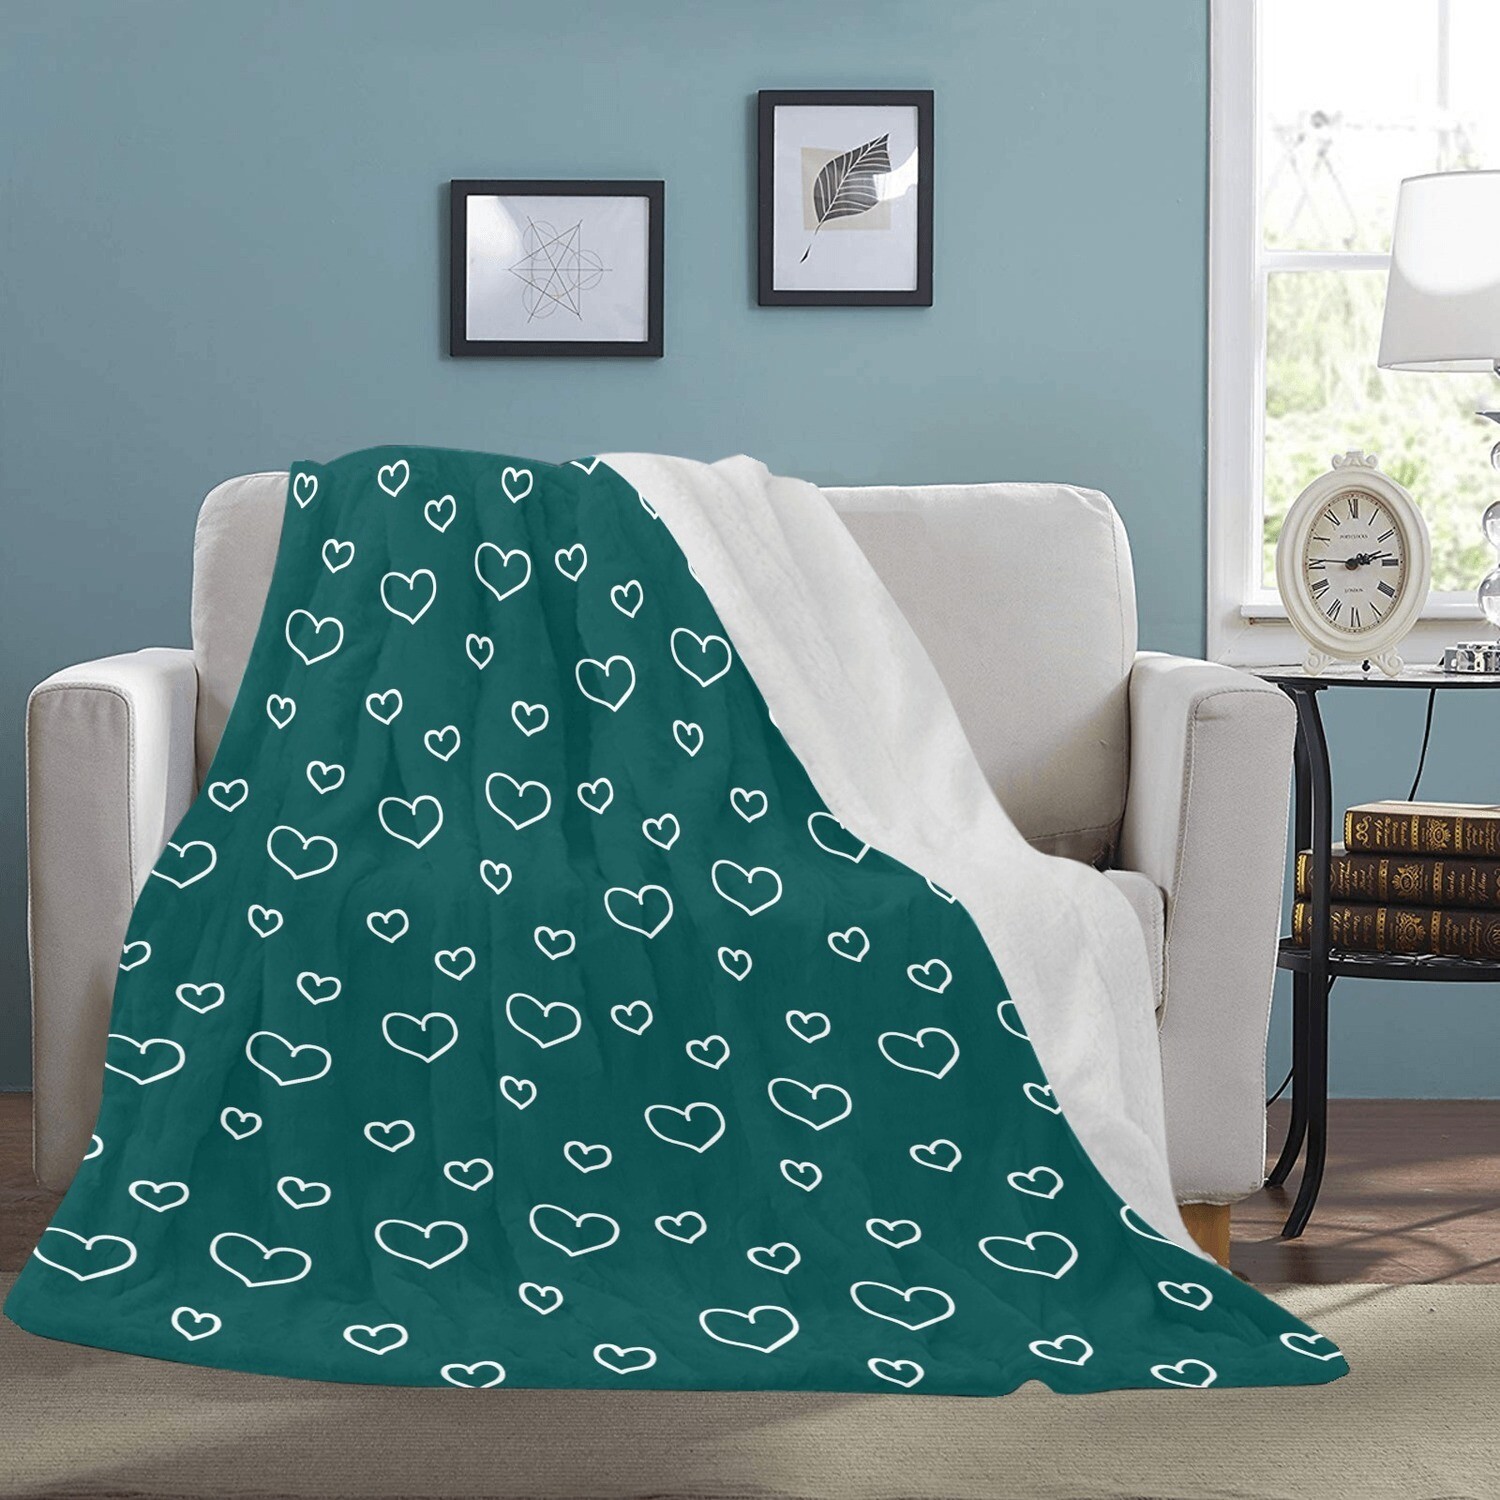 🤴🏽👸🏽💕Large Ultra-Soft Micro Fleece Blanket Valentine white outline hearts on dark teal, gift, gift for her, gift for him, gift for them, 70"x80"